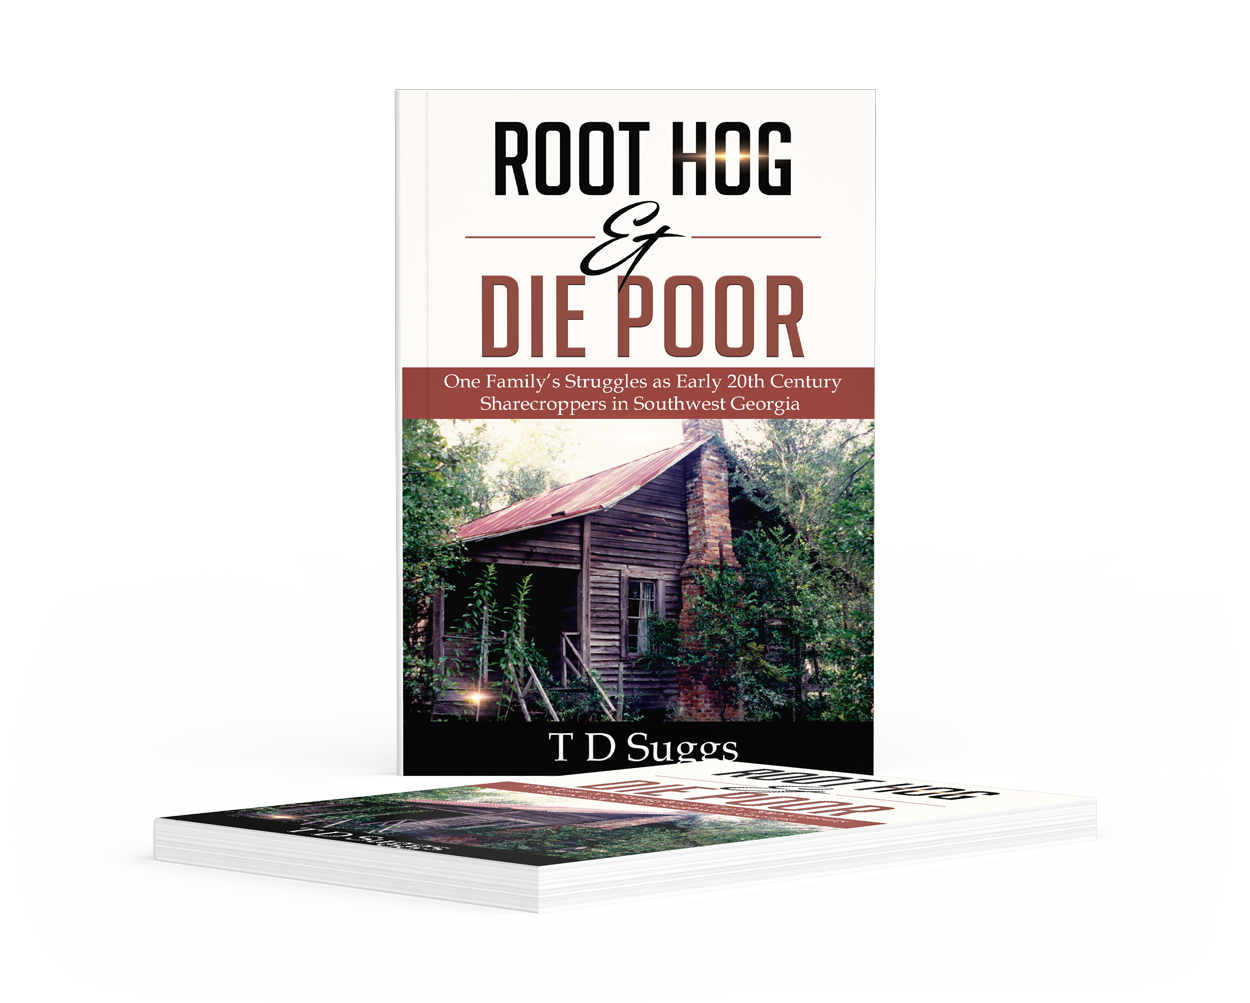 Root Hog & Die Poor: One Family’s Struggles as Sharecroppers in Early 20th Century Southwest Georgia